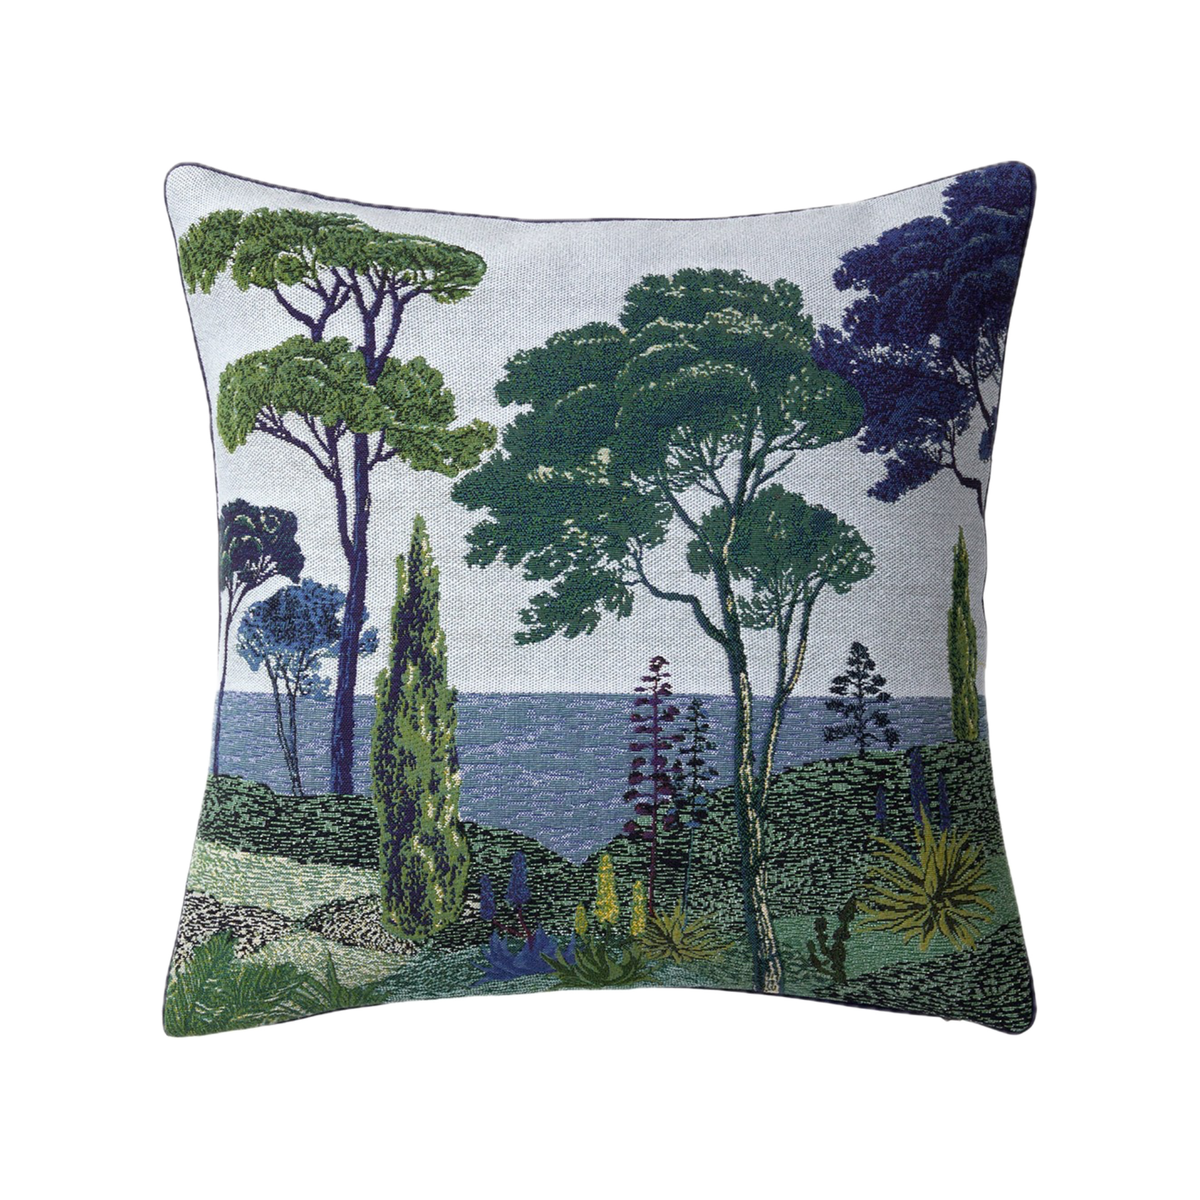 Decorative Pillow of Yves Delorme Parc Bedding in Azure Design